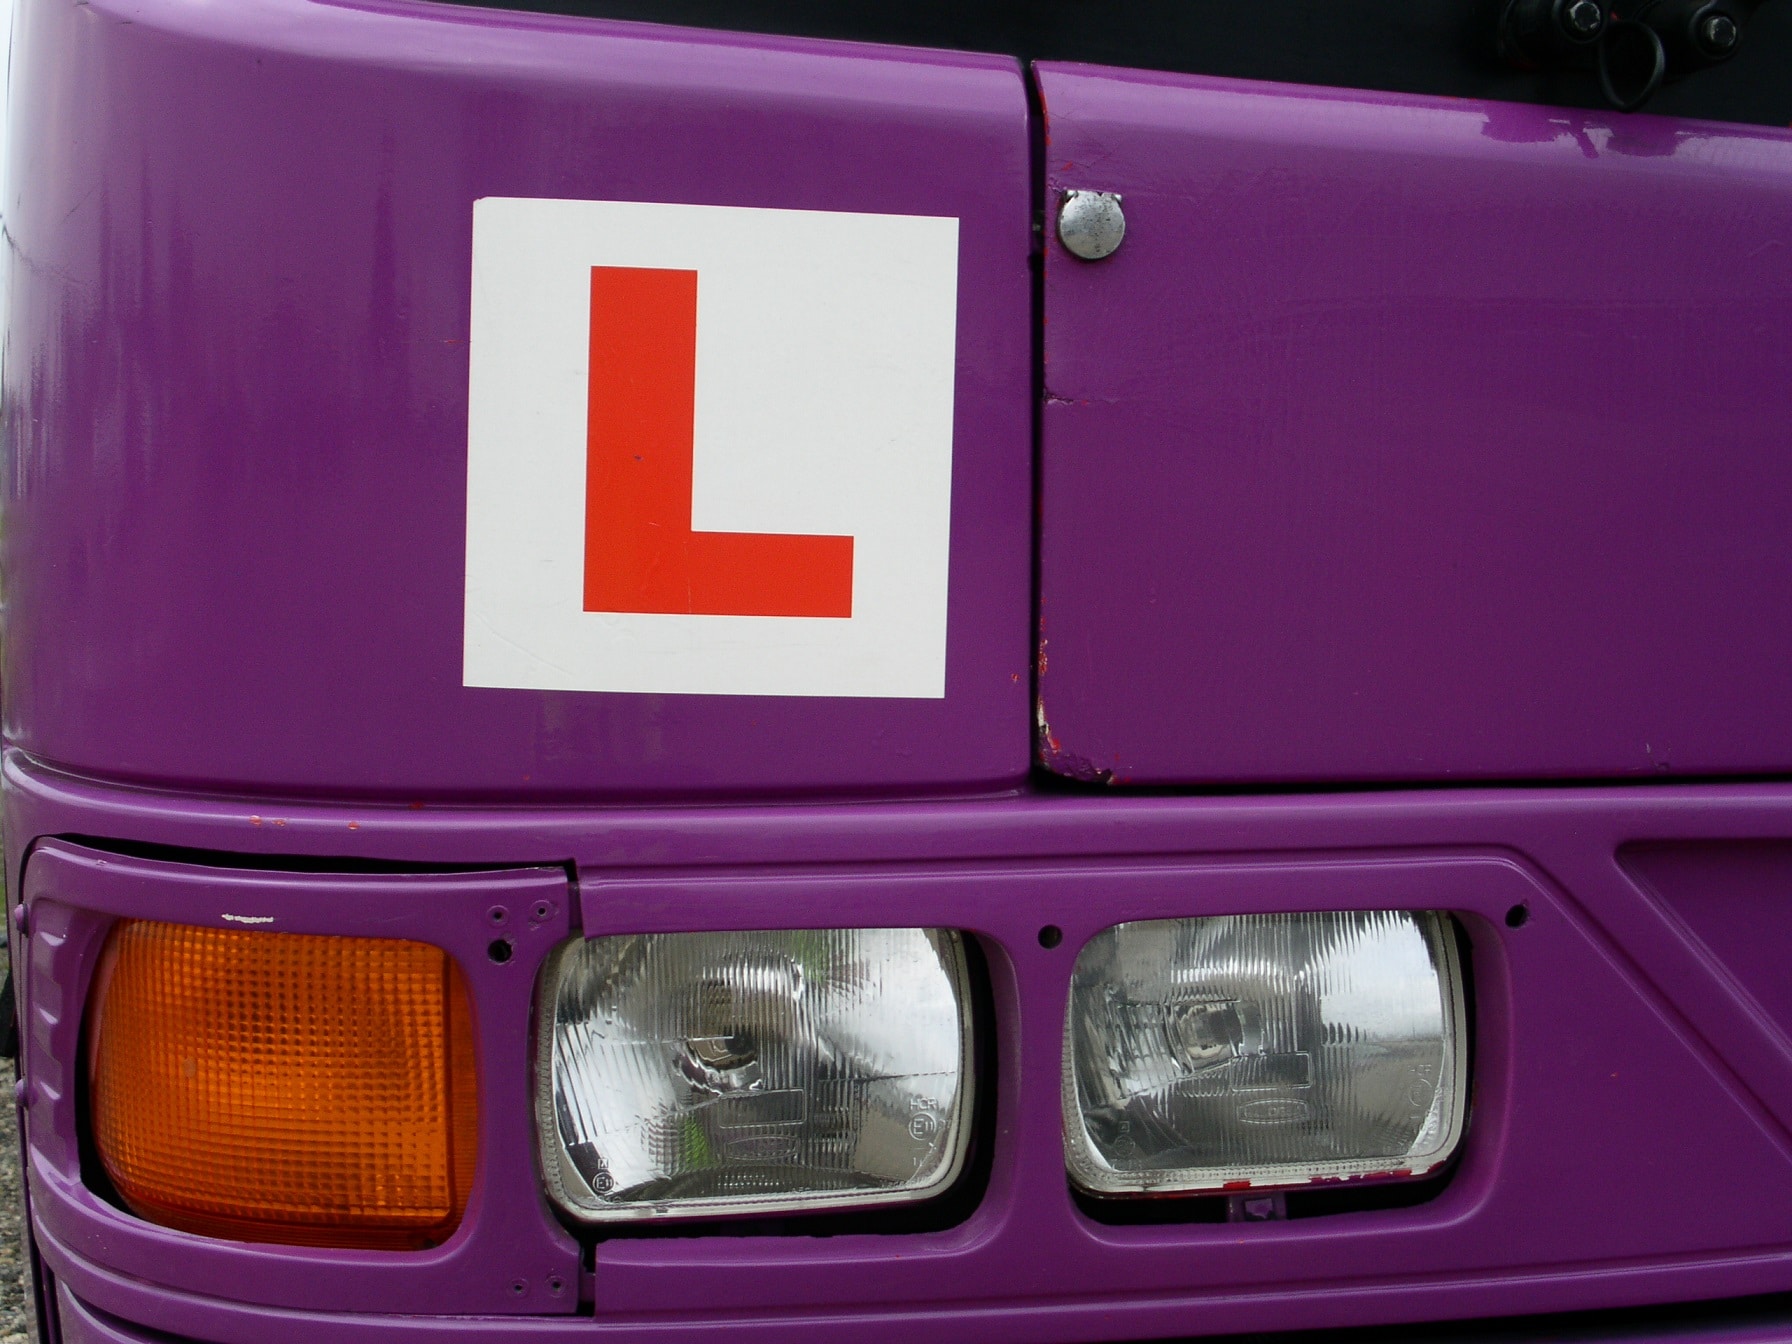 Changes to PCV driving test structure from 15 November